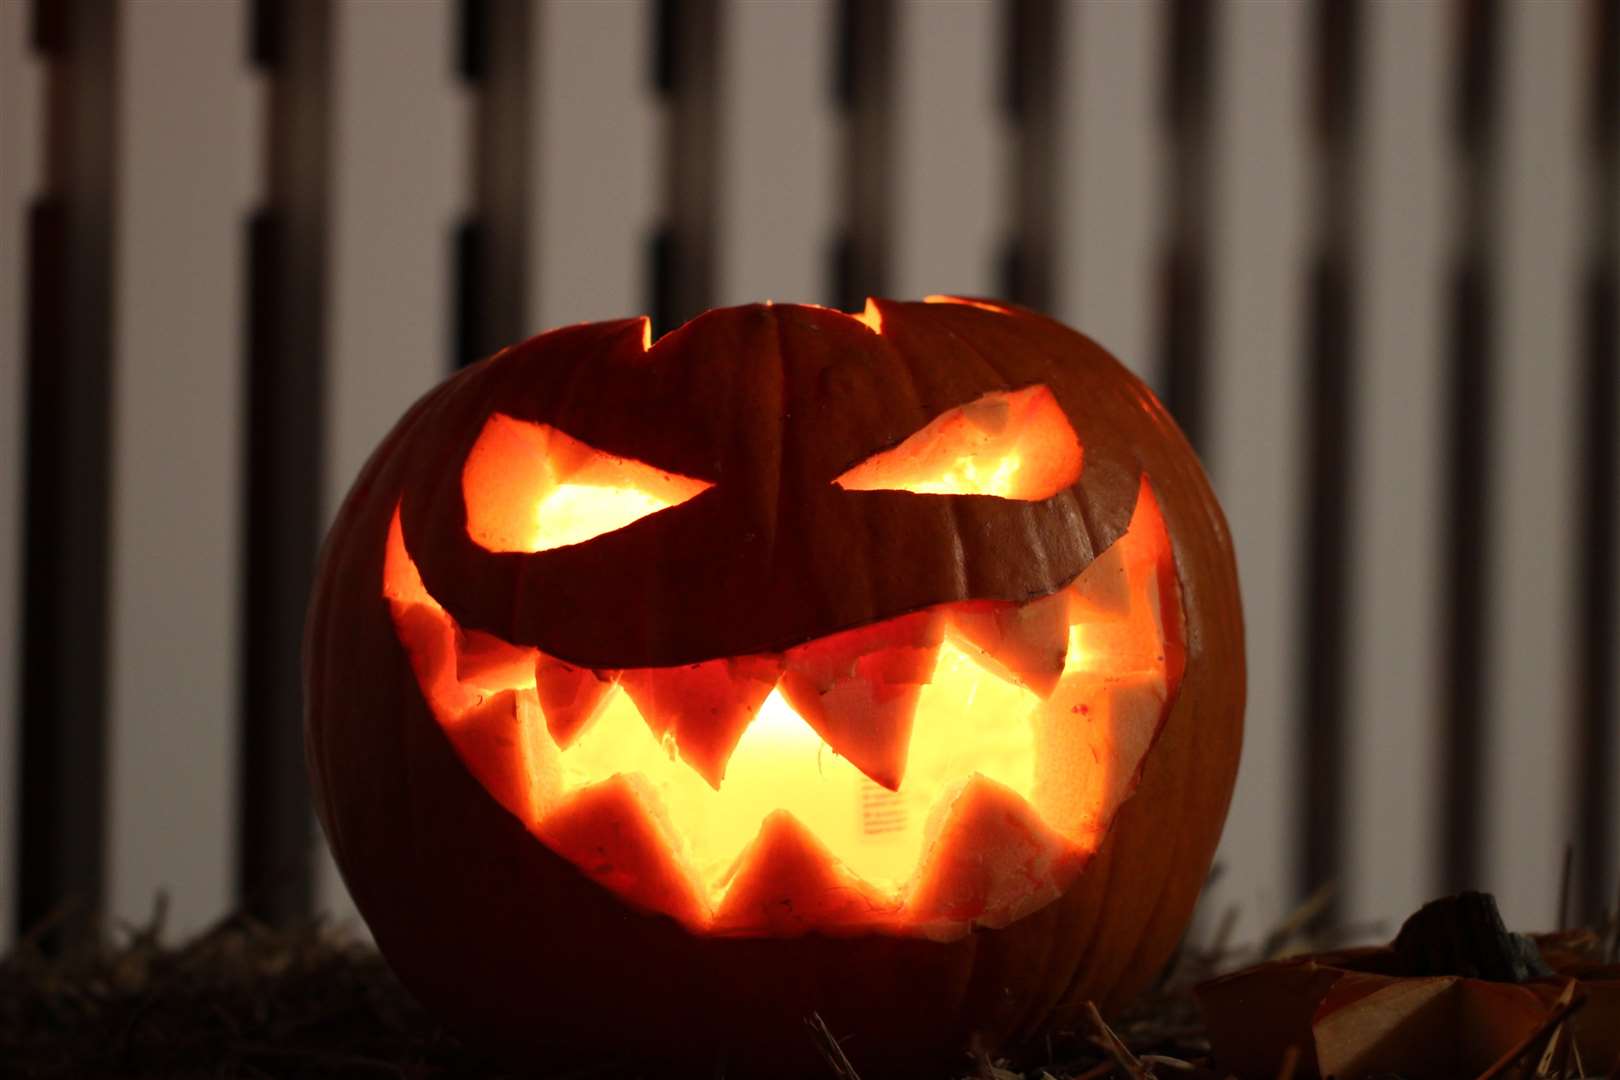 Stil planning on what to do on Halloween week? Here are a few events running in Nairnshire. Picture by: Pixabay.